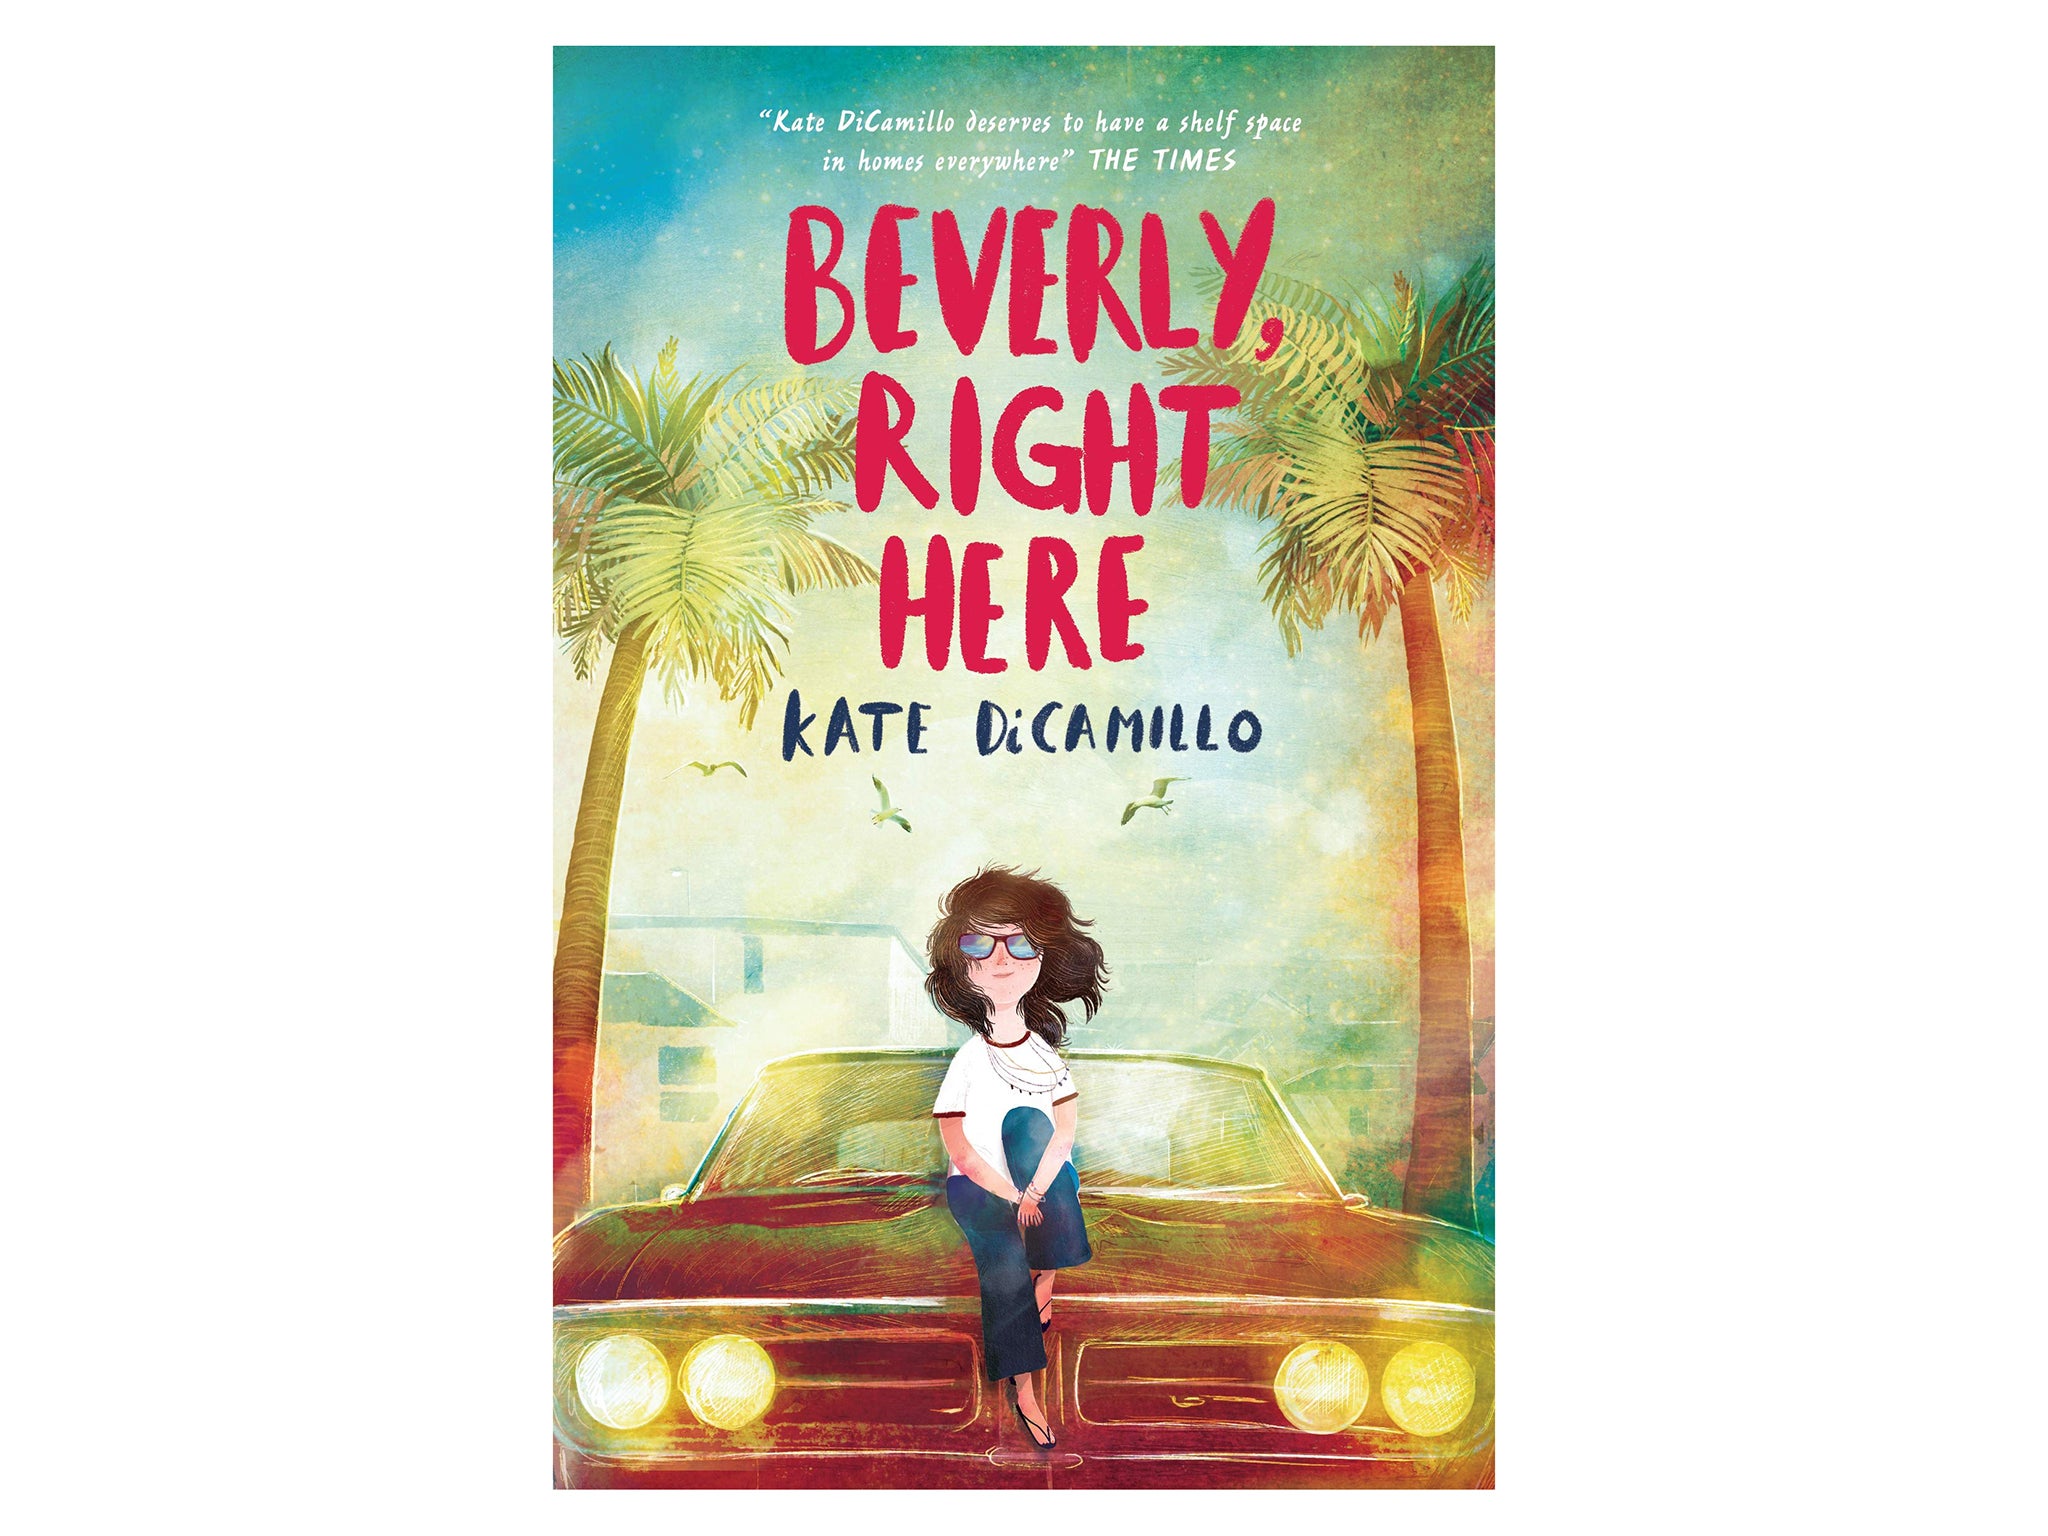 beverly-right-here-kate-dicamillo-carneige-medal-2021-longlist-indybest.jpg